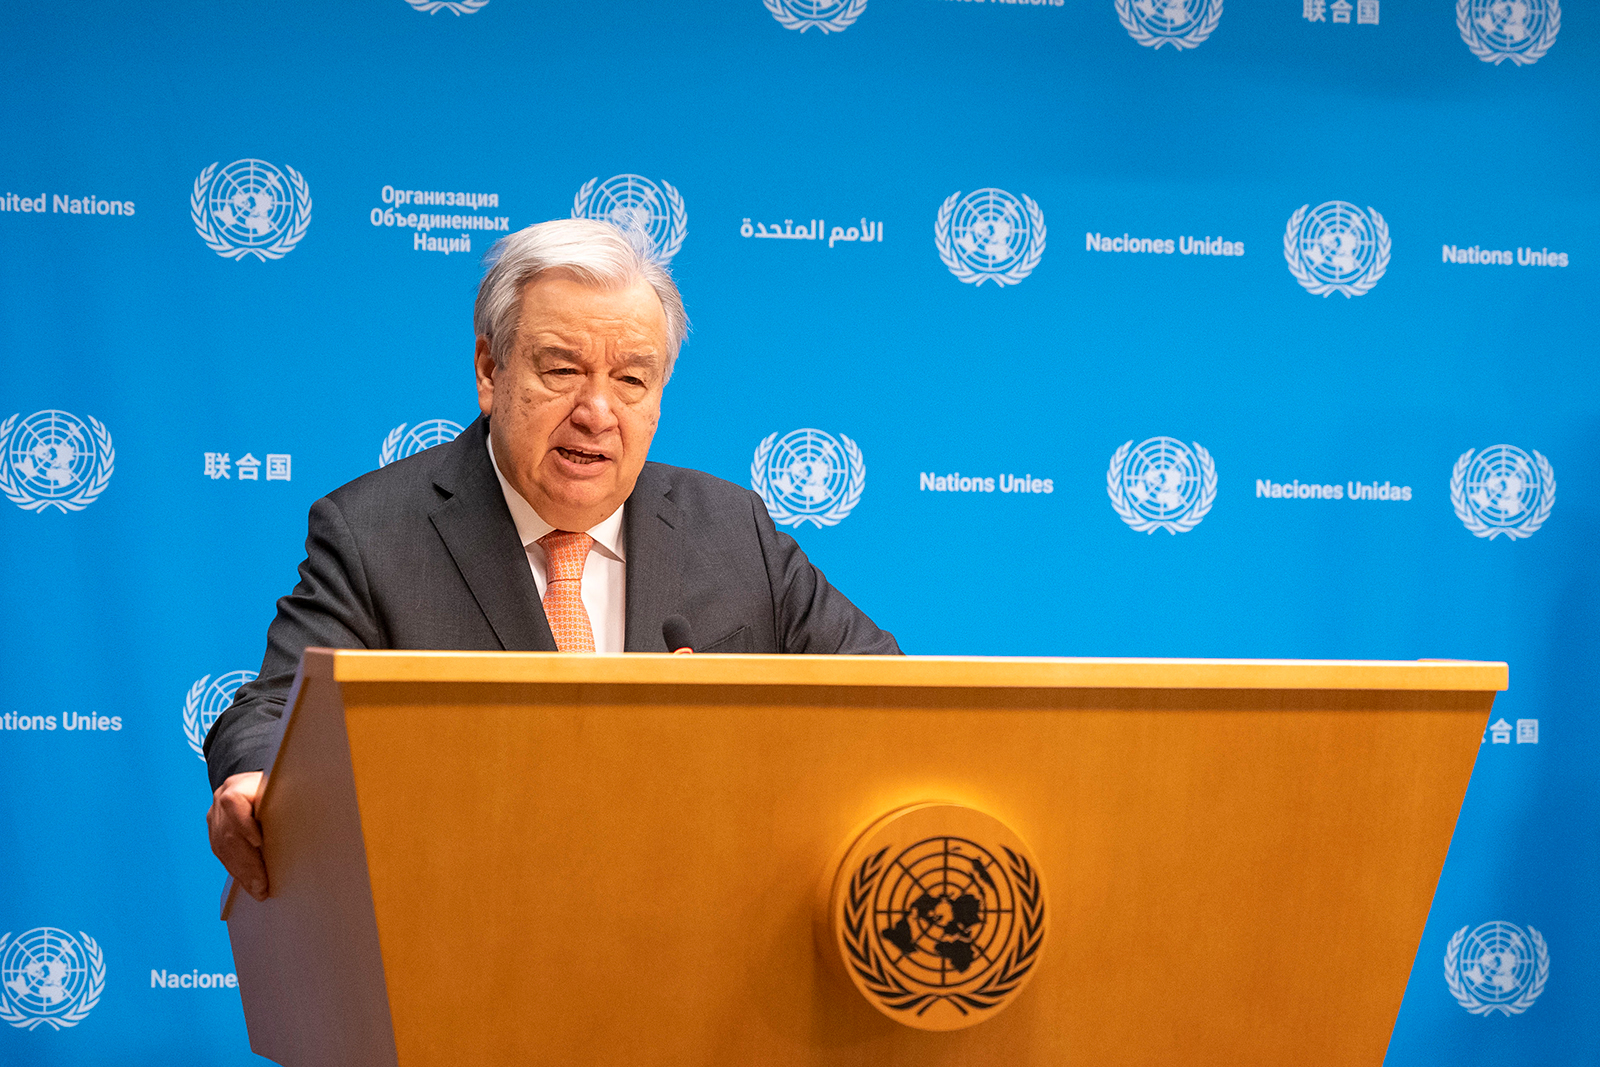 Antonio Guterres attends a press briefing at the UN headquarters on January 15, in New York City.